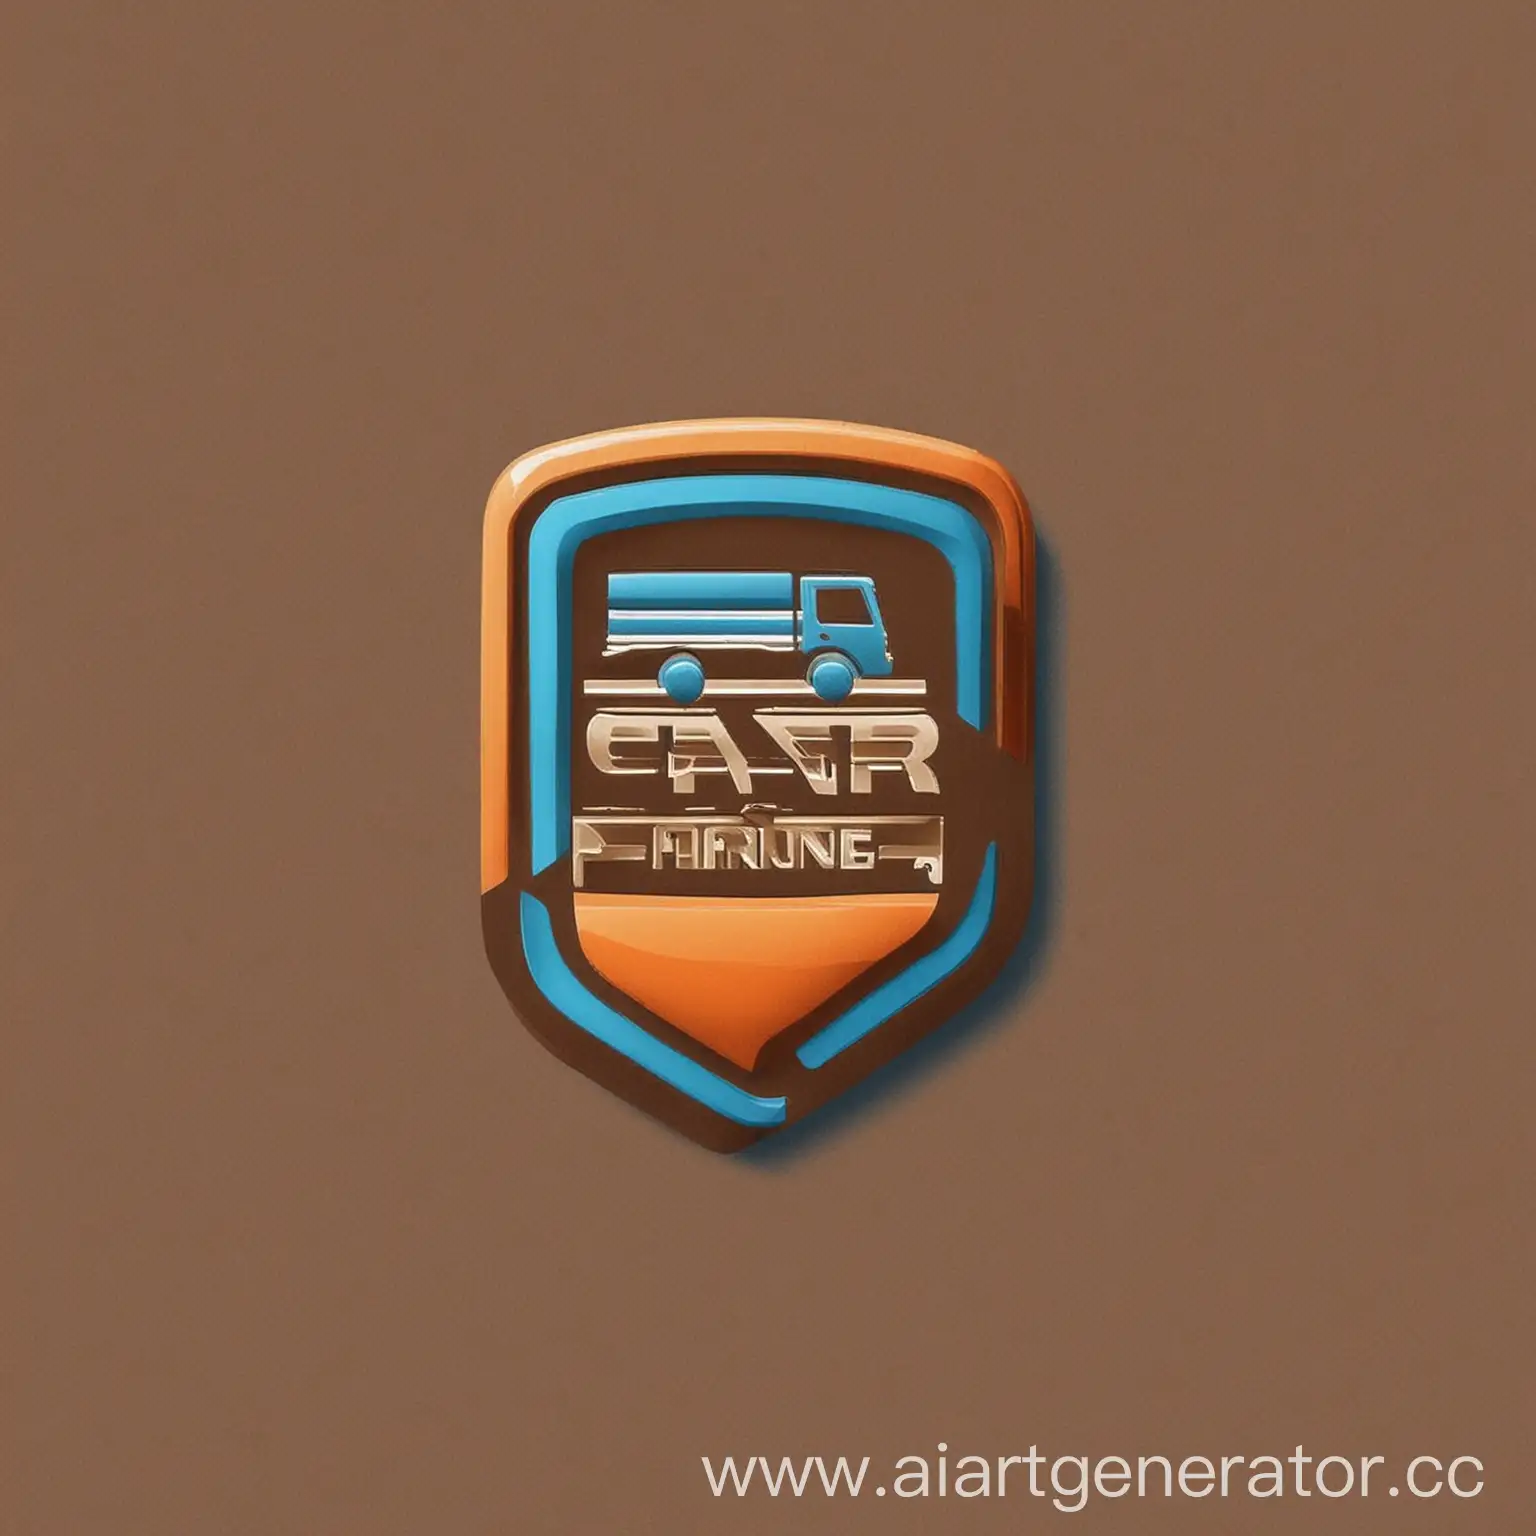 Car-Sharing-Company-Logo-with-Brown-Blue-and-Orange-Colors